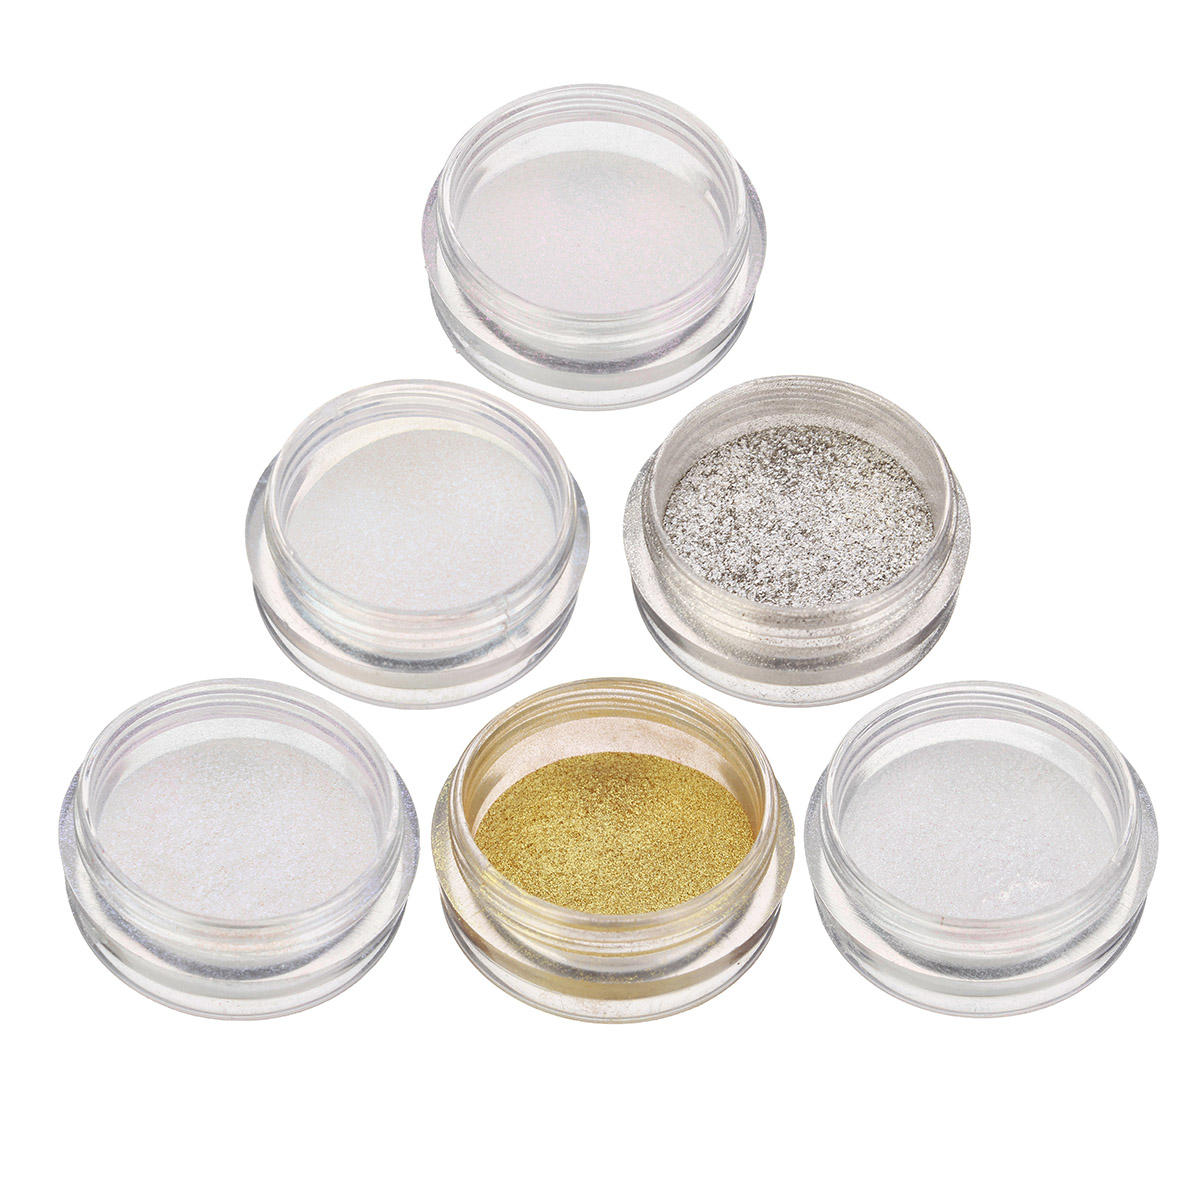 6 Colors Shining Metallic Nail Powder Glitter Shimmer Sequins Chrome Dust Pigment Manicure